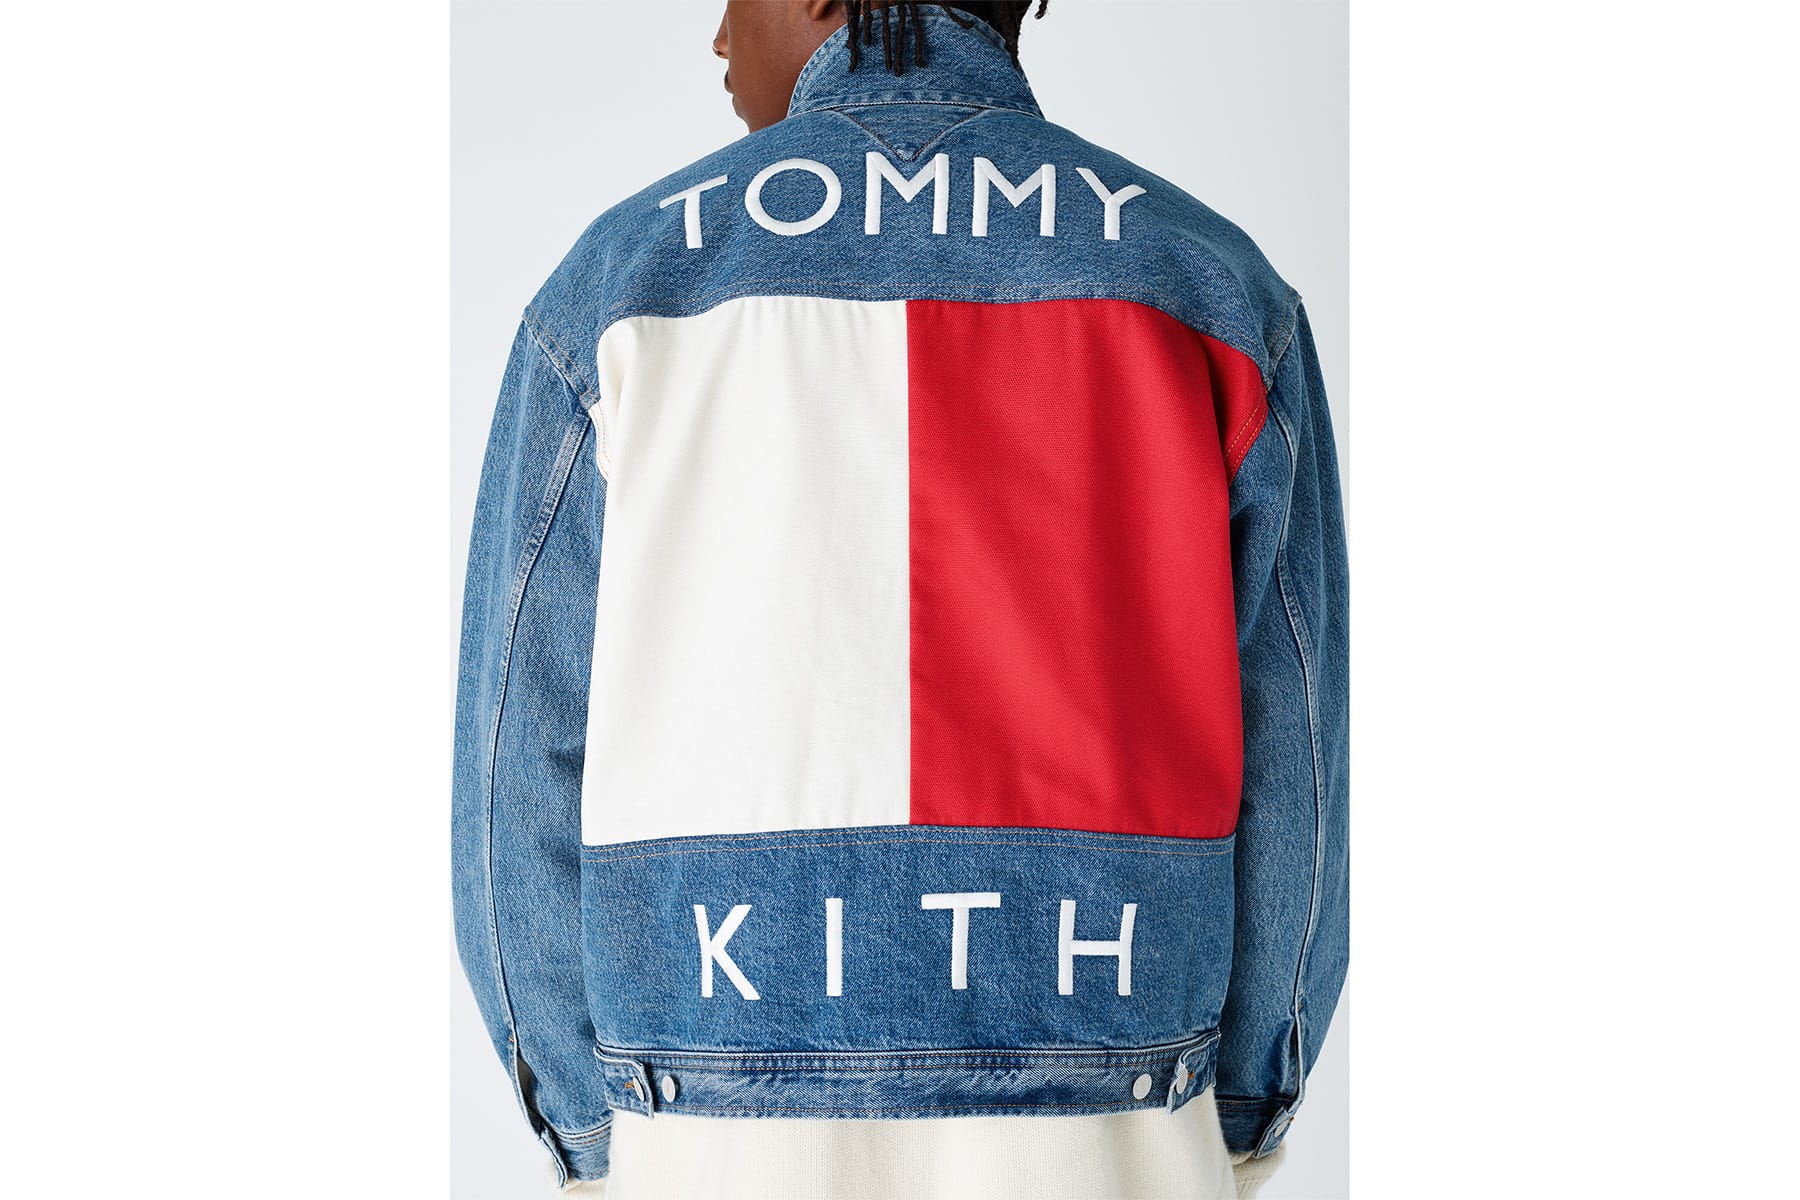 Tommy Hilfiger Supreme Outlet, 58% OFF | www.ingeniovirtual.com